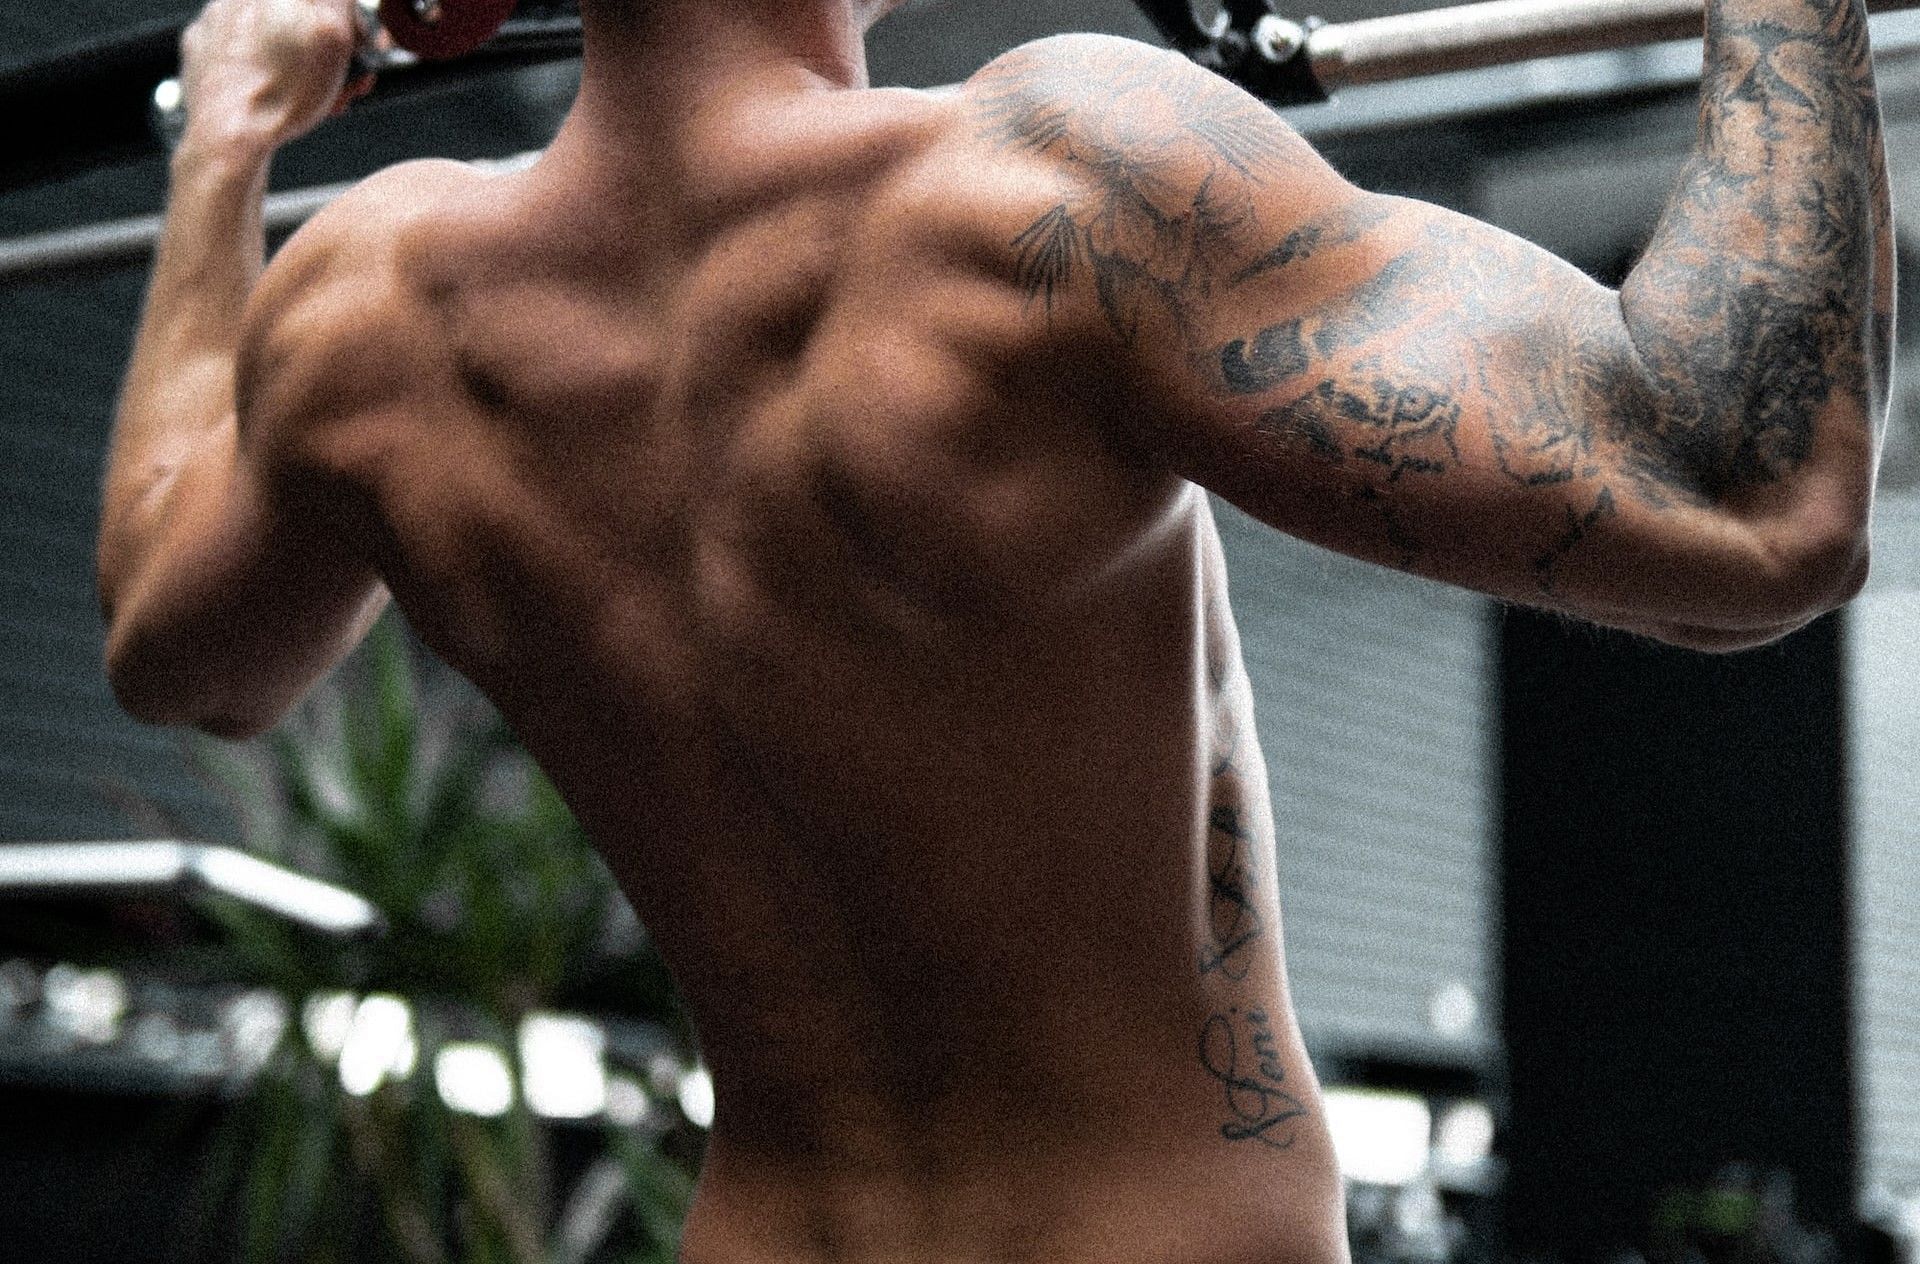 Trap exercises can help men add mass.